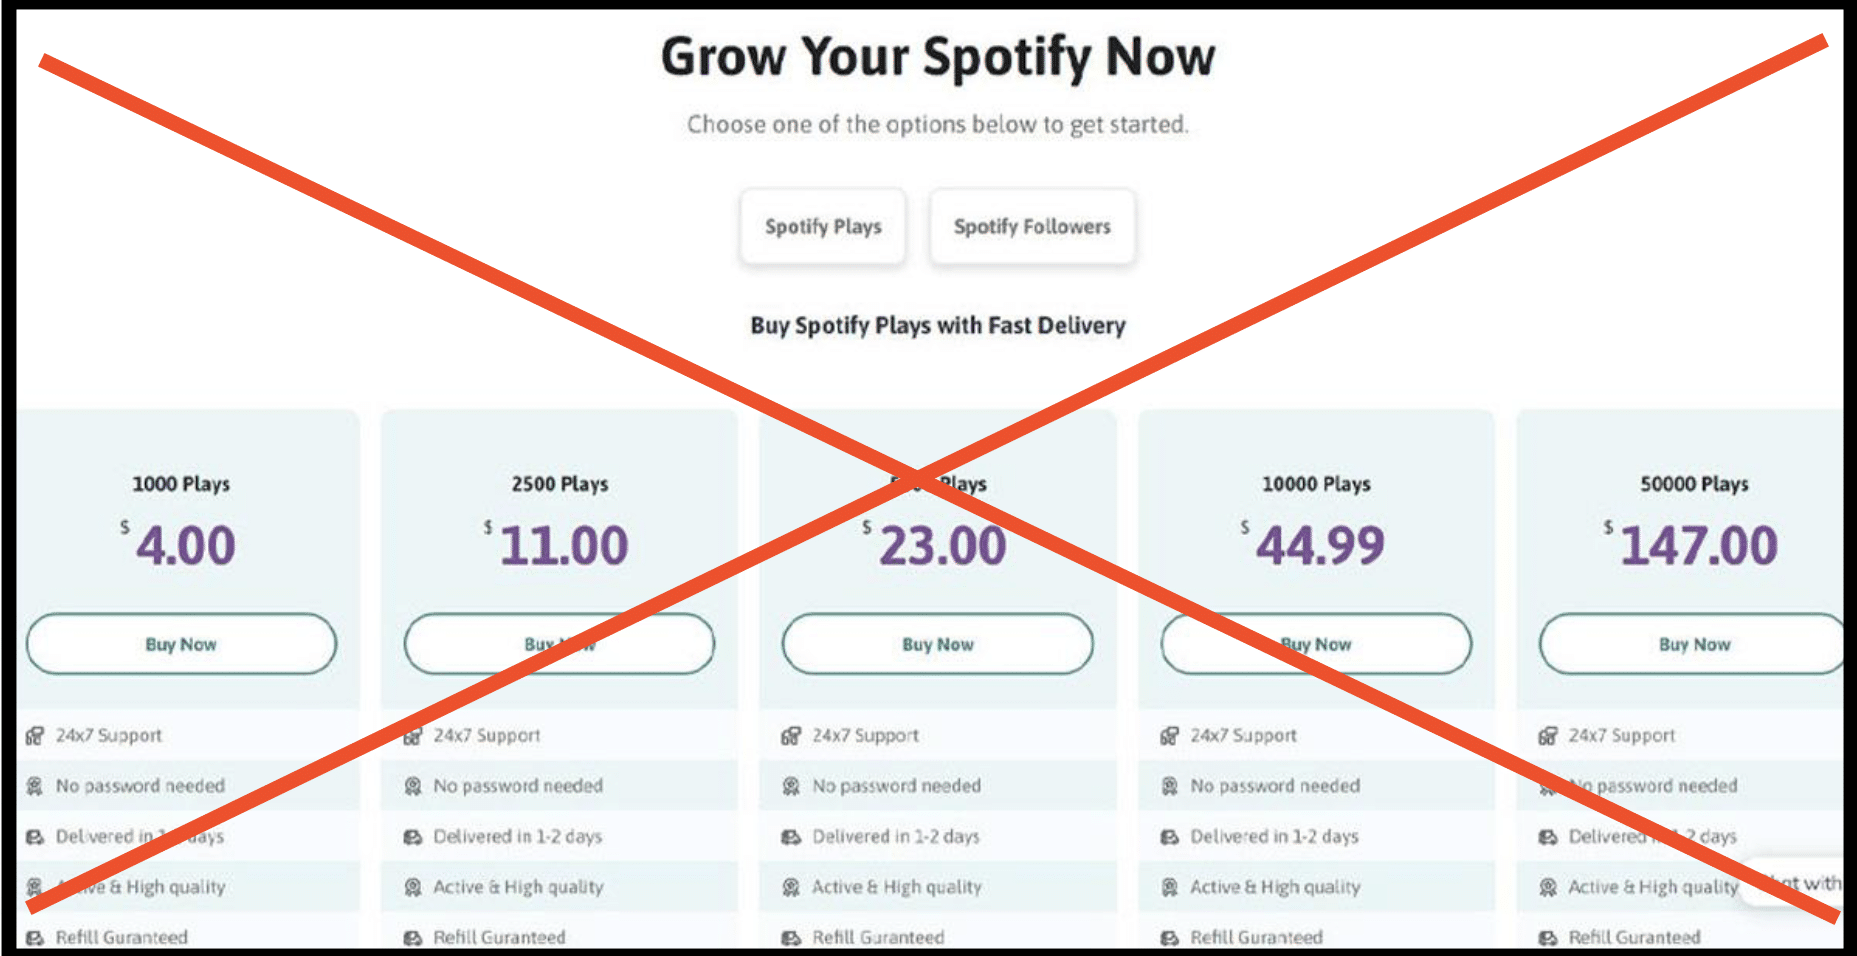 Buying Spotify Plays 1 e1694217980335 - Unison